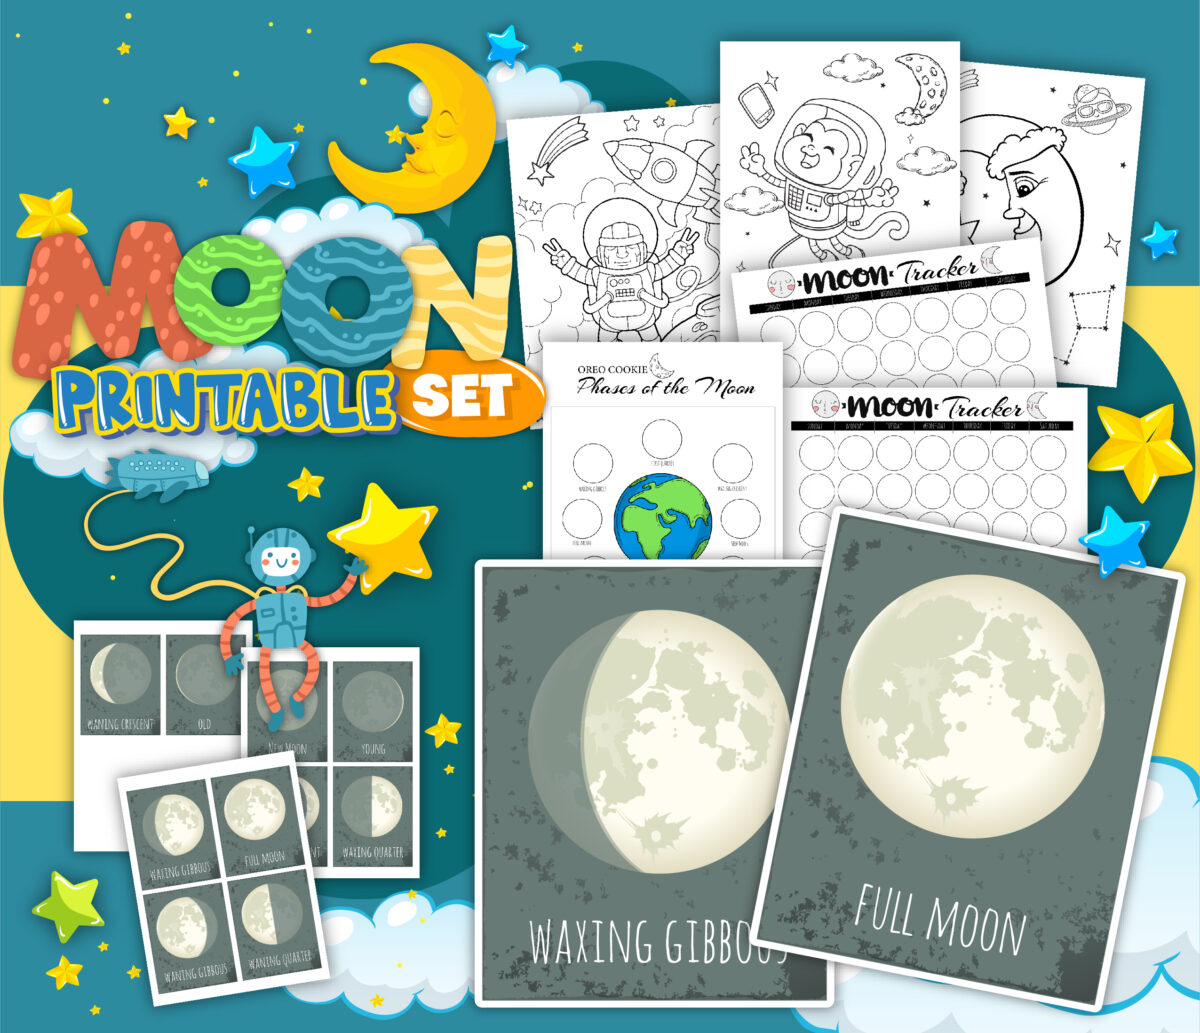 These free printable phases of the moon worksheets include moon phases cards, oreo phases of the moon, colouring pages and more!